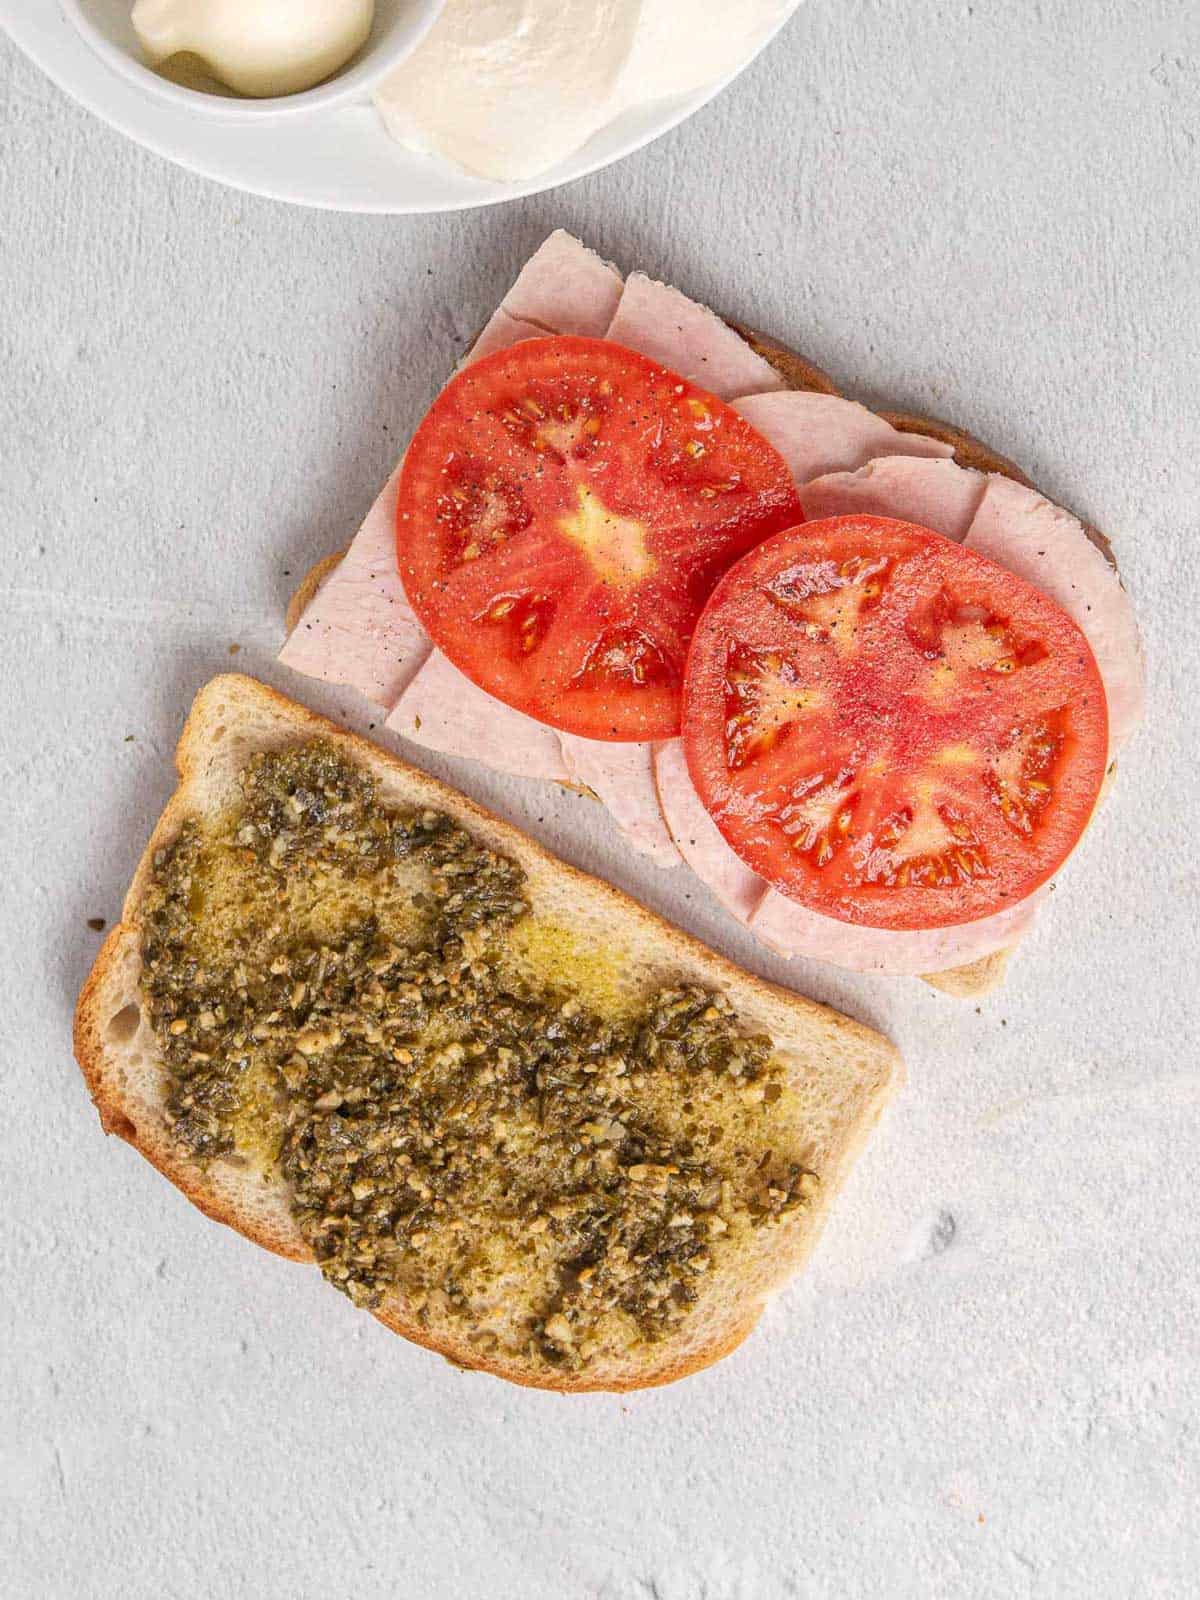 Two pieces of sourdough bread with pesto layered across the top. One one slice of bread, thick slices of turkey are layered on top with tomato slices on top of the turkey. The tomato slices have been salted and peppered.